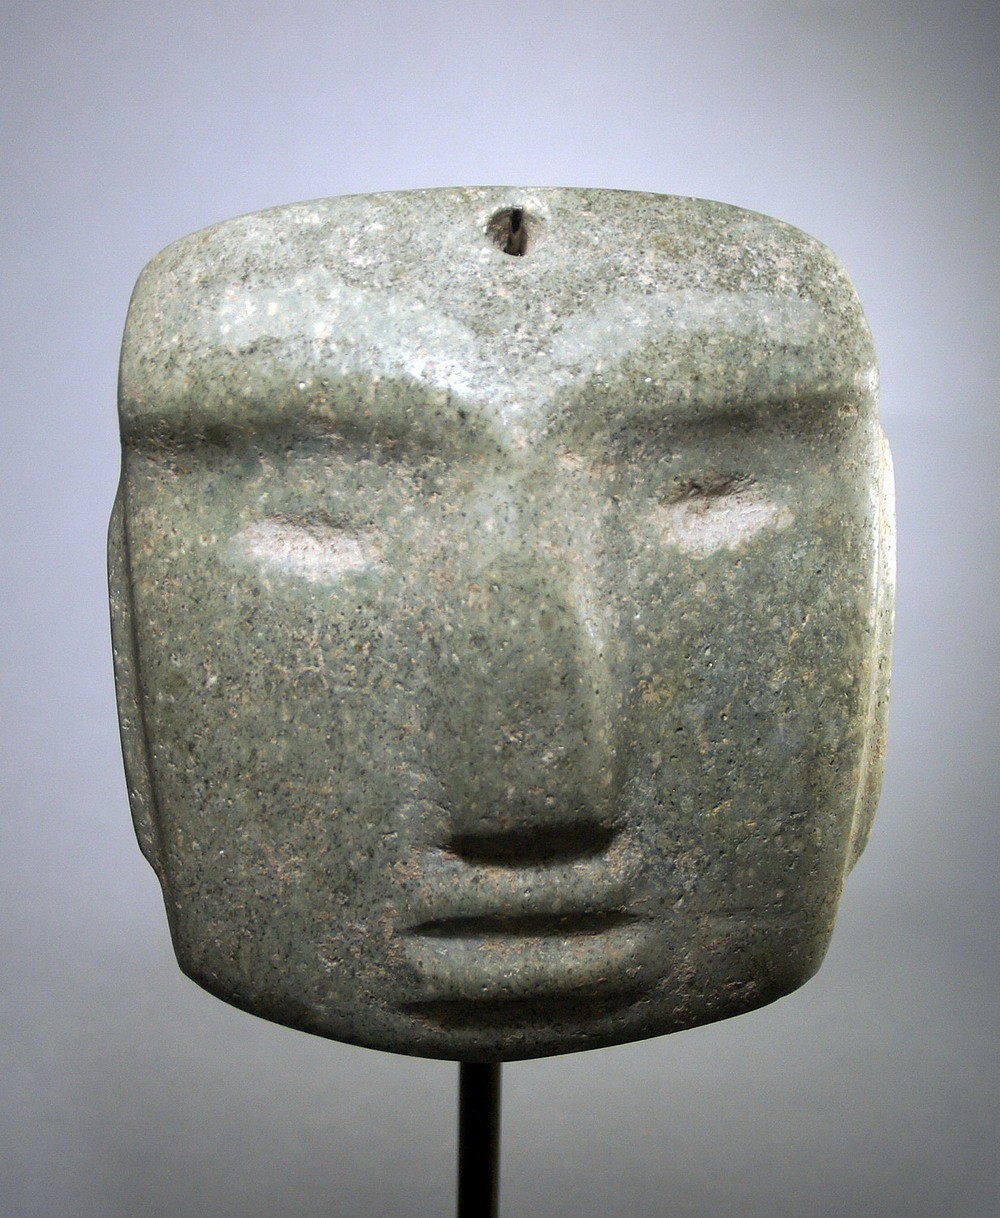 Mexico, Chontal Green Stone Mask with eyebrows
Classic Chontal style mask with unusual depiction of the eyebrows, which are etched into the stone.  Similar masks are illustrated in CHONTAL: ANCIENT STONE SCULPTURE FROM GUERRERO MEXICO, page 59, A, B, C. & page 60.  There are strong root marks all over.
Media: Stone
Dimensions: Width: 6 1/4" x Height 7"
$12,000
N5021